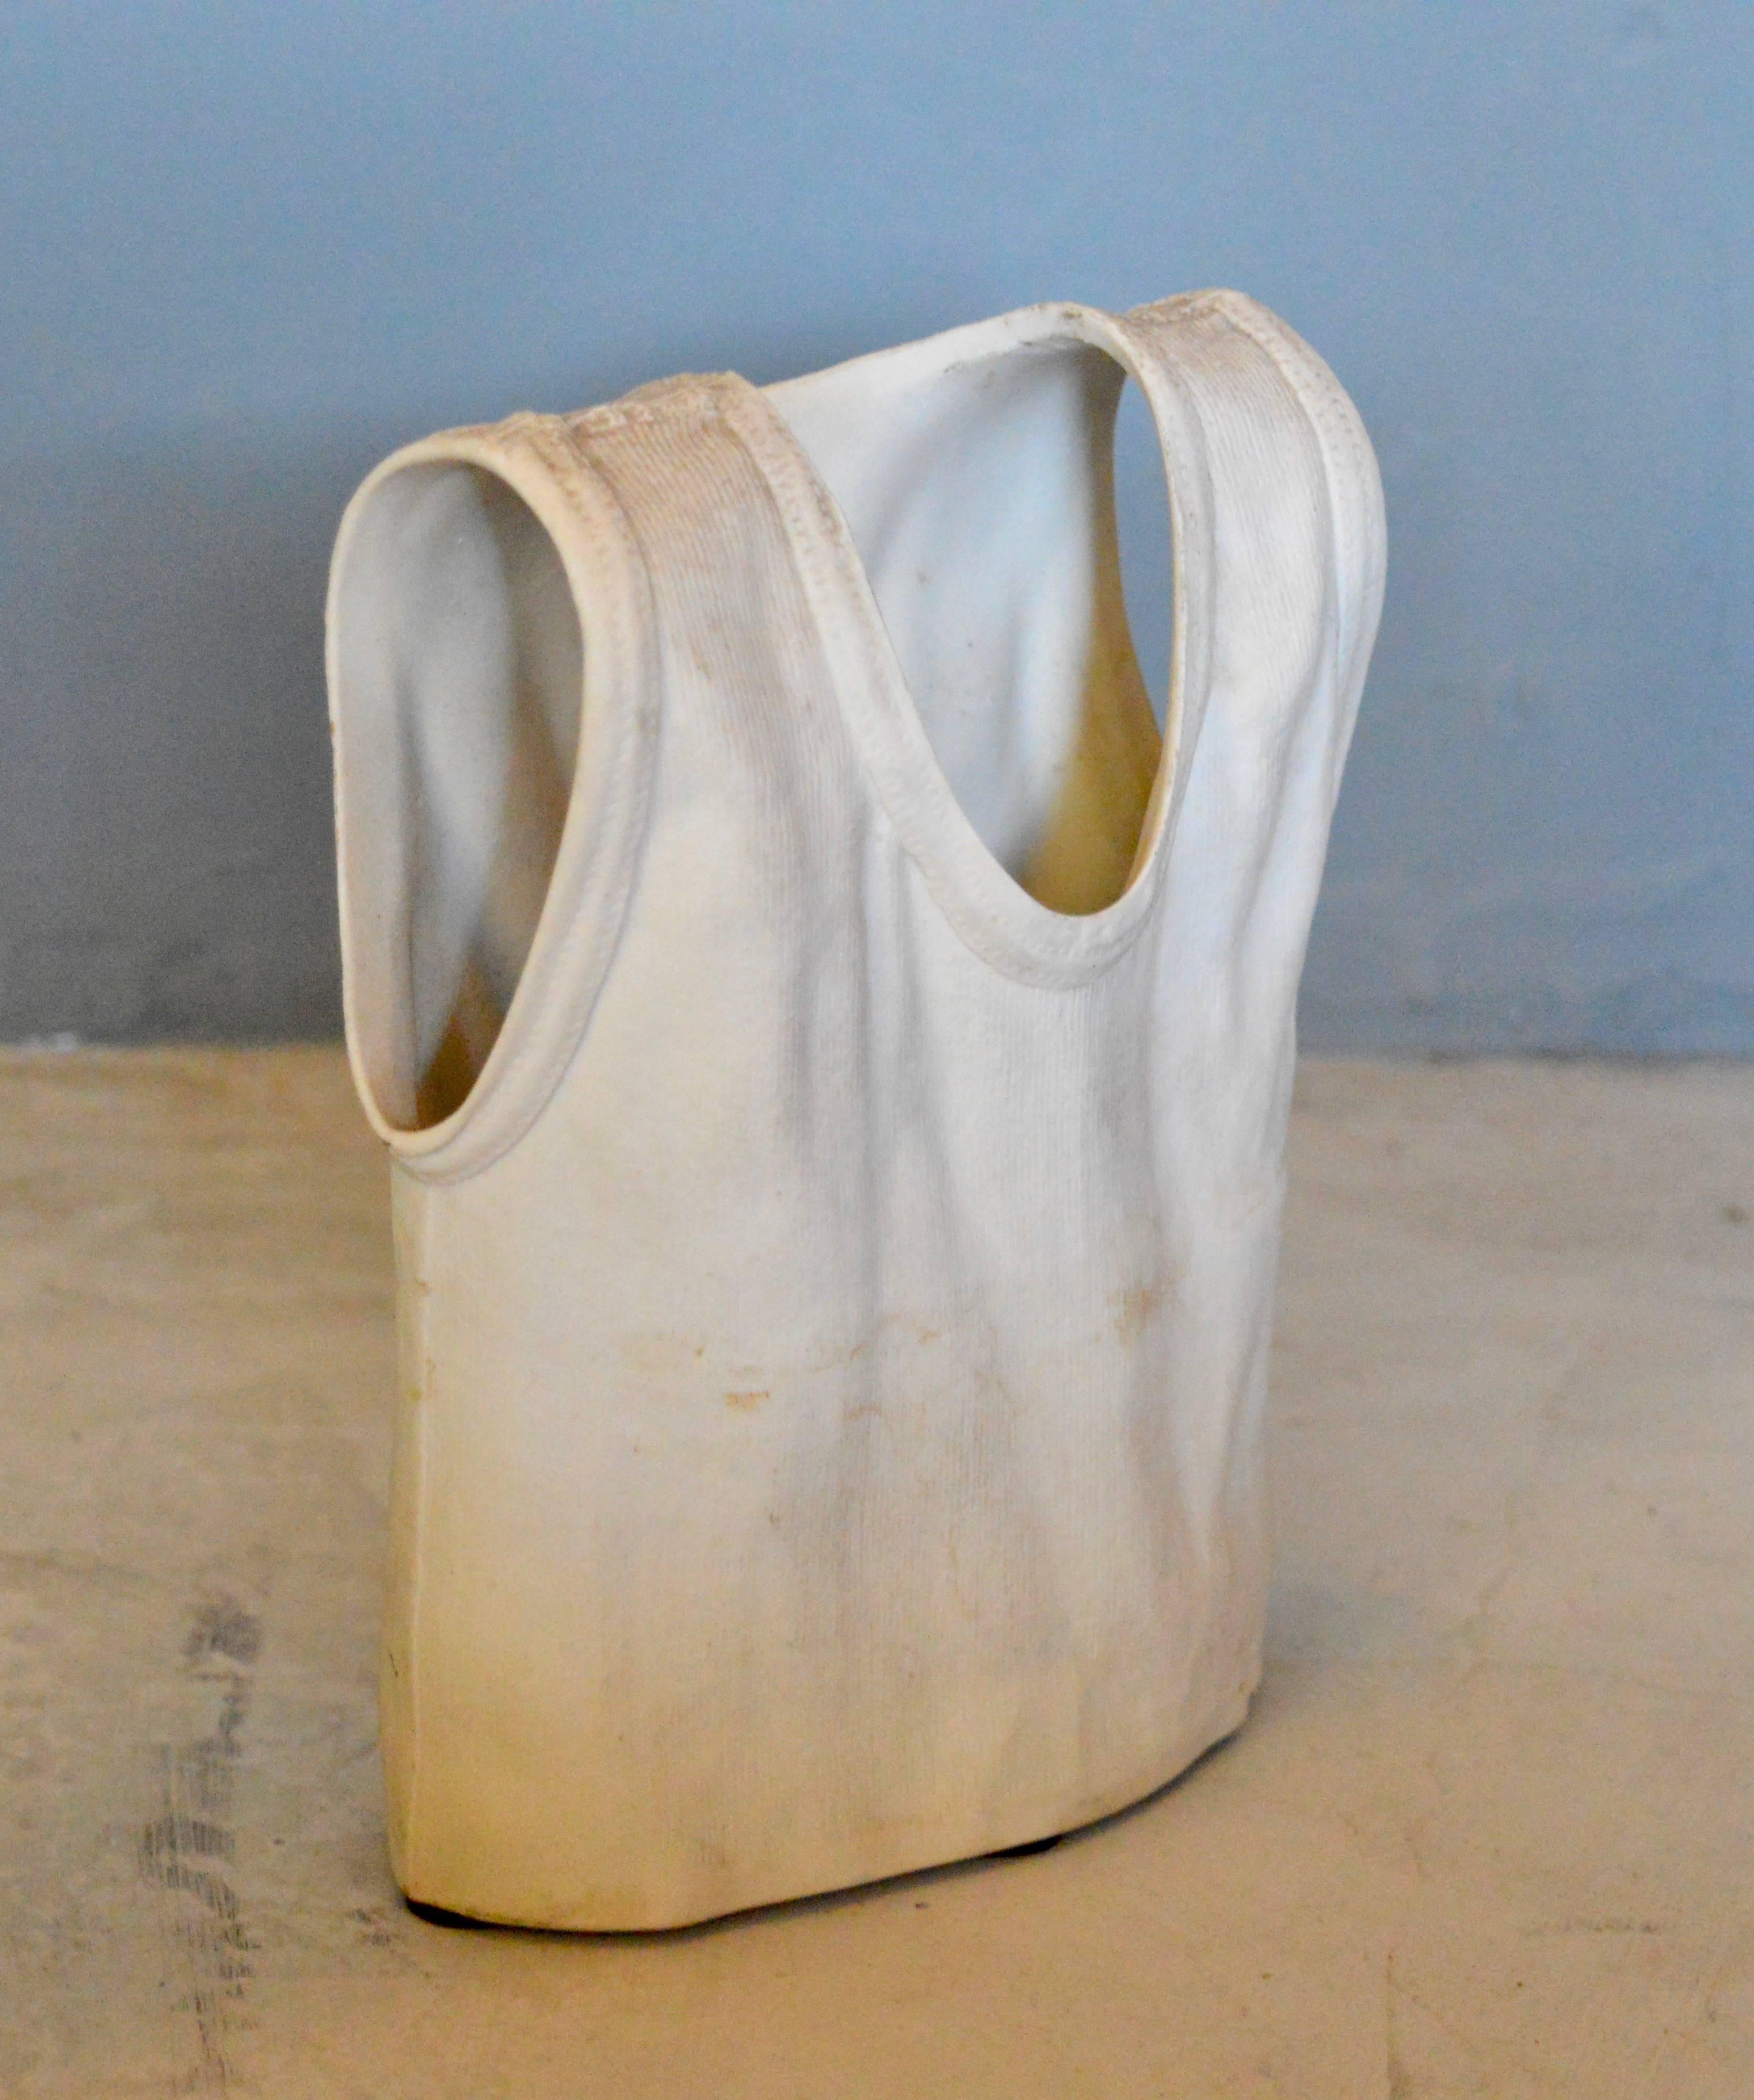 Unique white ceramic t-shirt vase made in Canada. Very interesting sculptural object. Larger ceramic t-shirt vase available in separate listing. Matching t-shirt vase available in separate listing in light blue and in pick. Excellent vintage